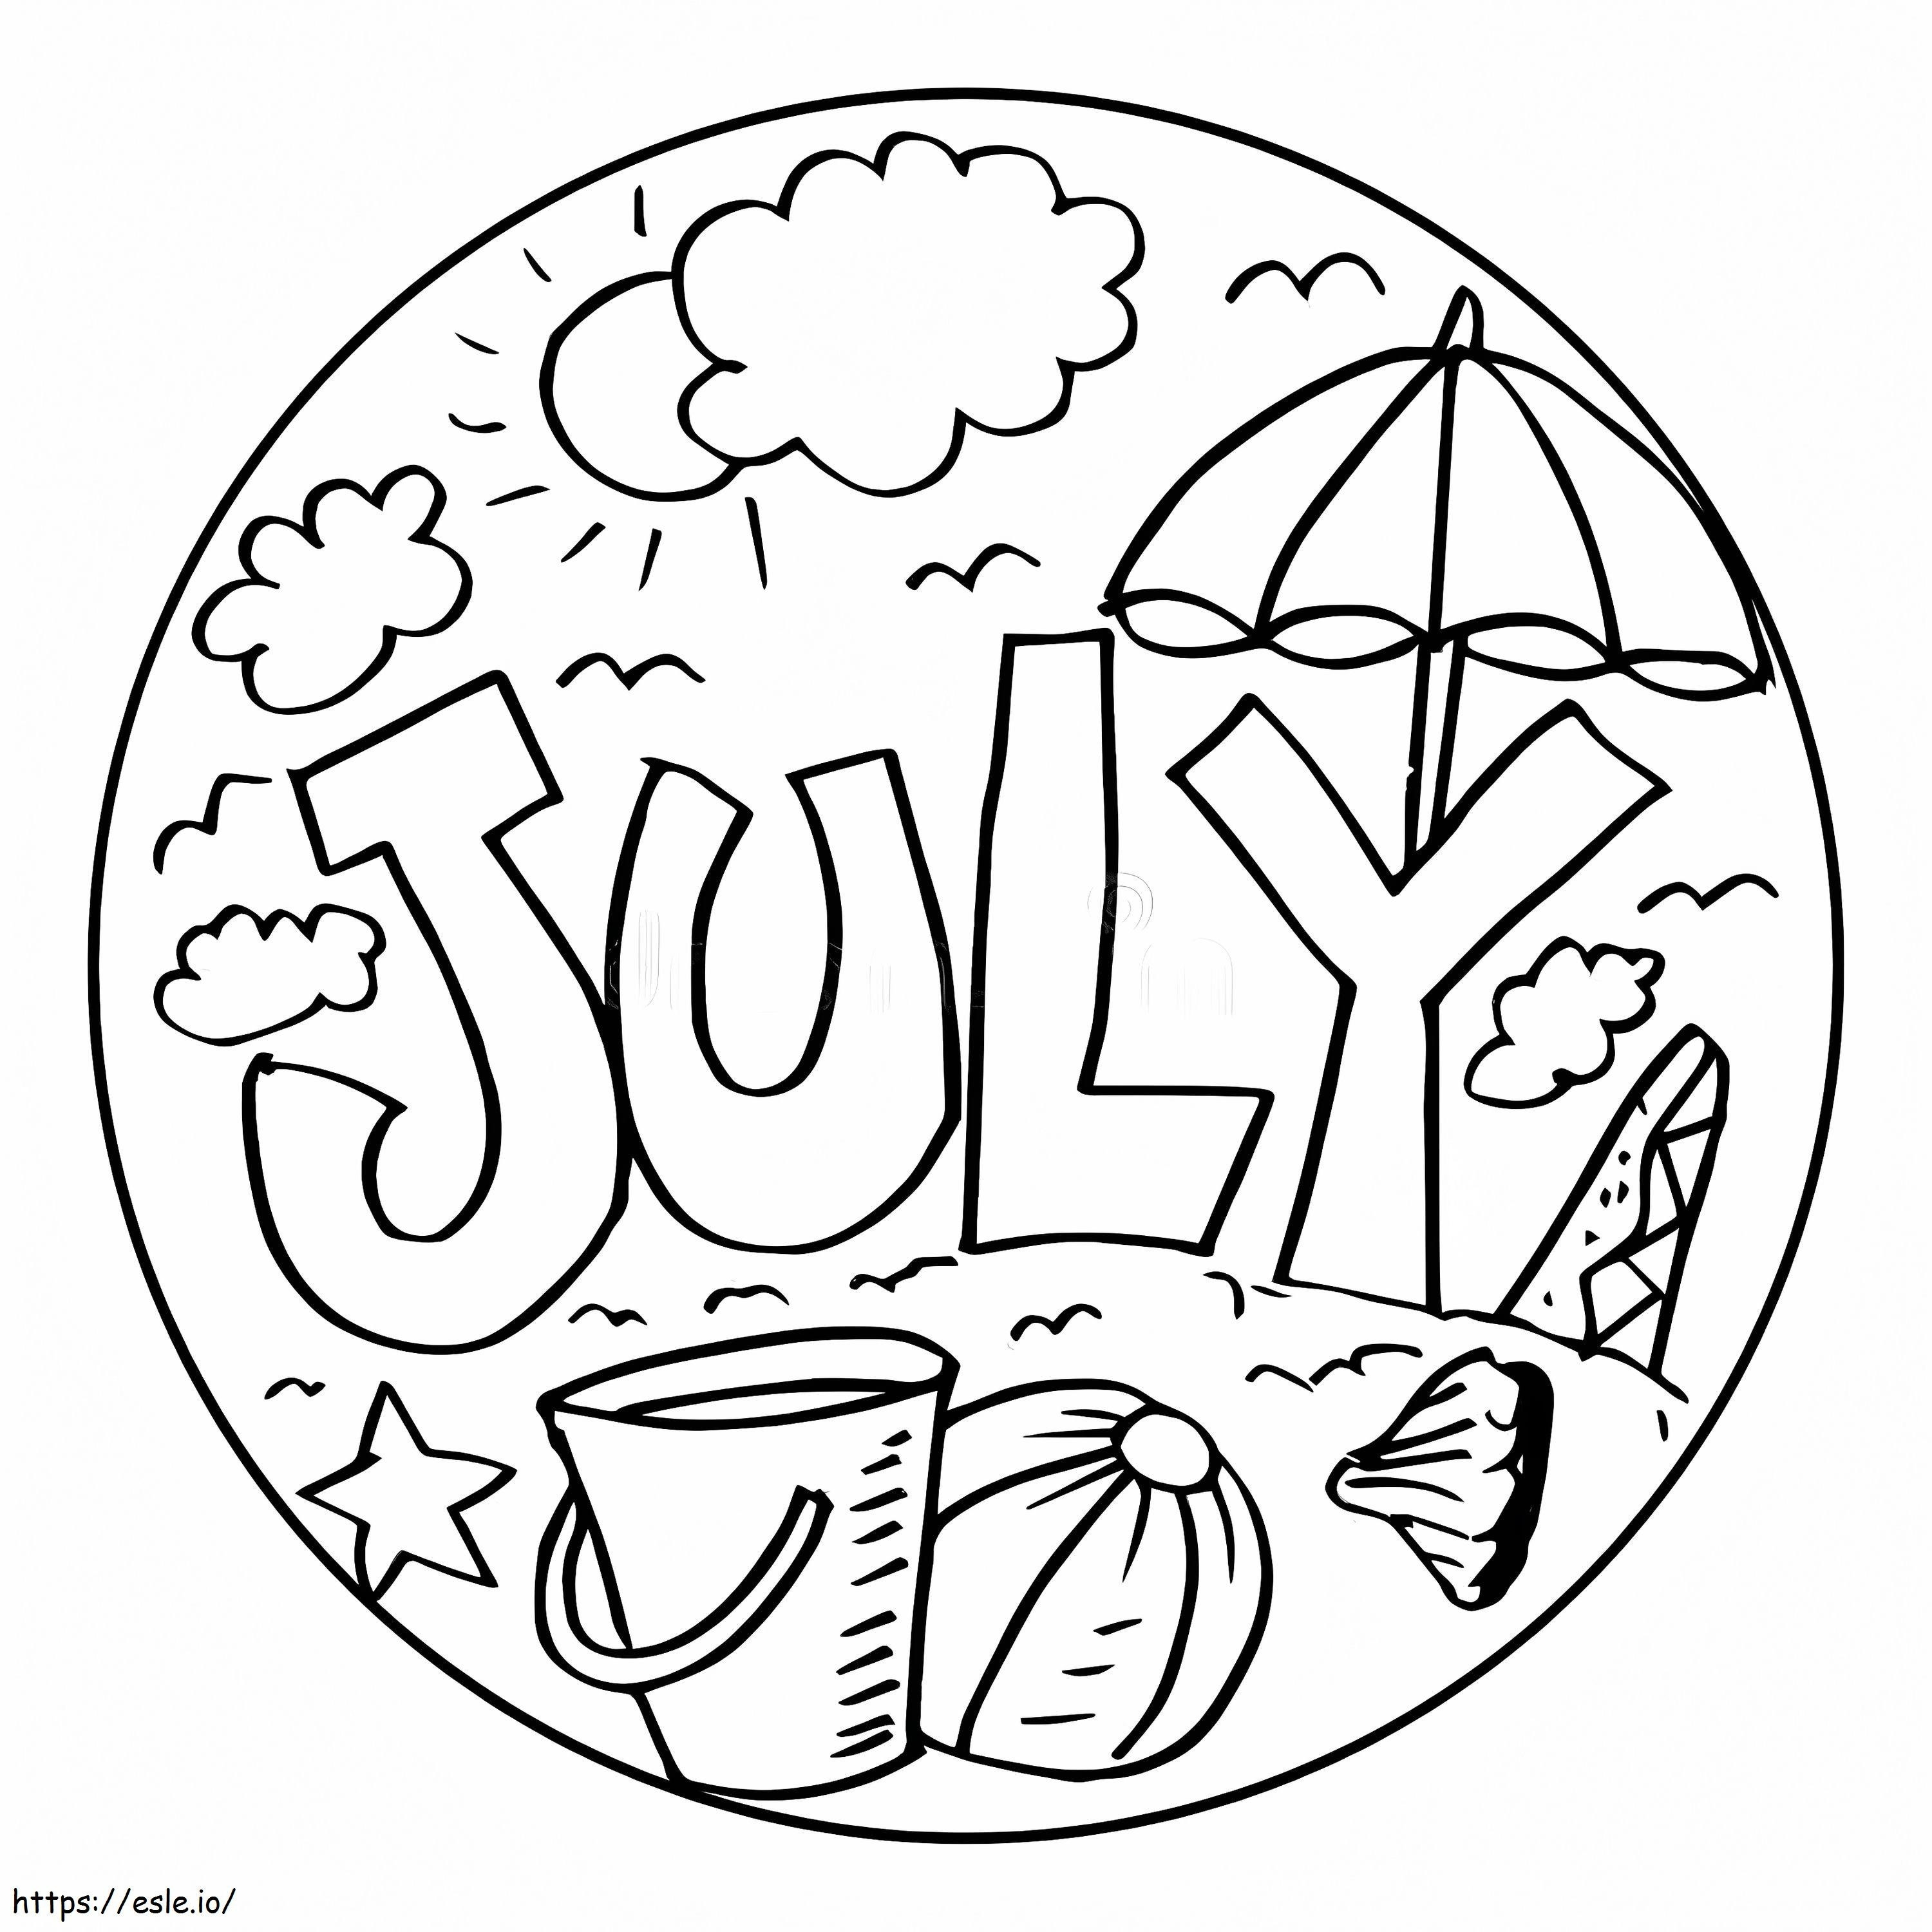 July Beach coloring page